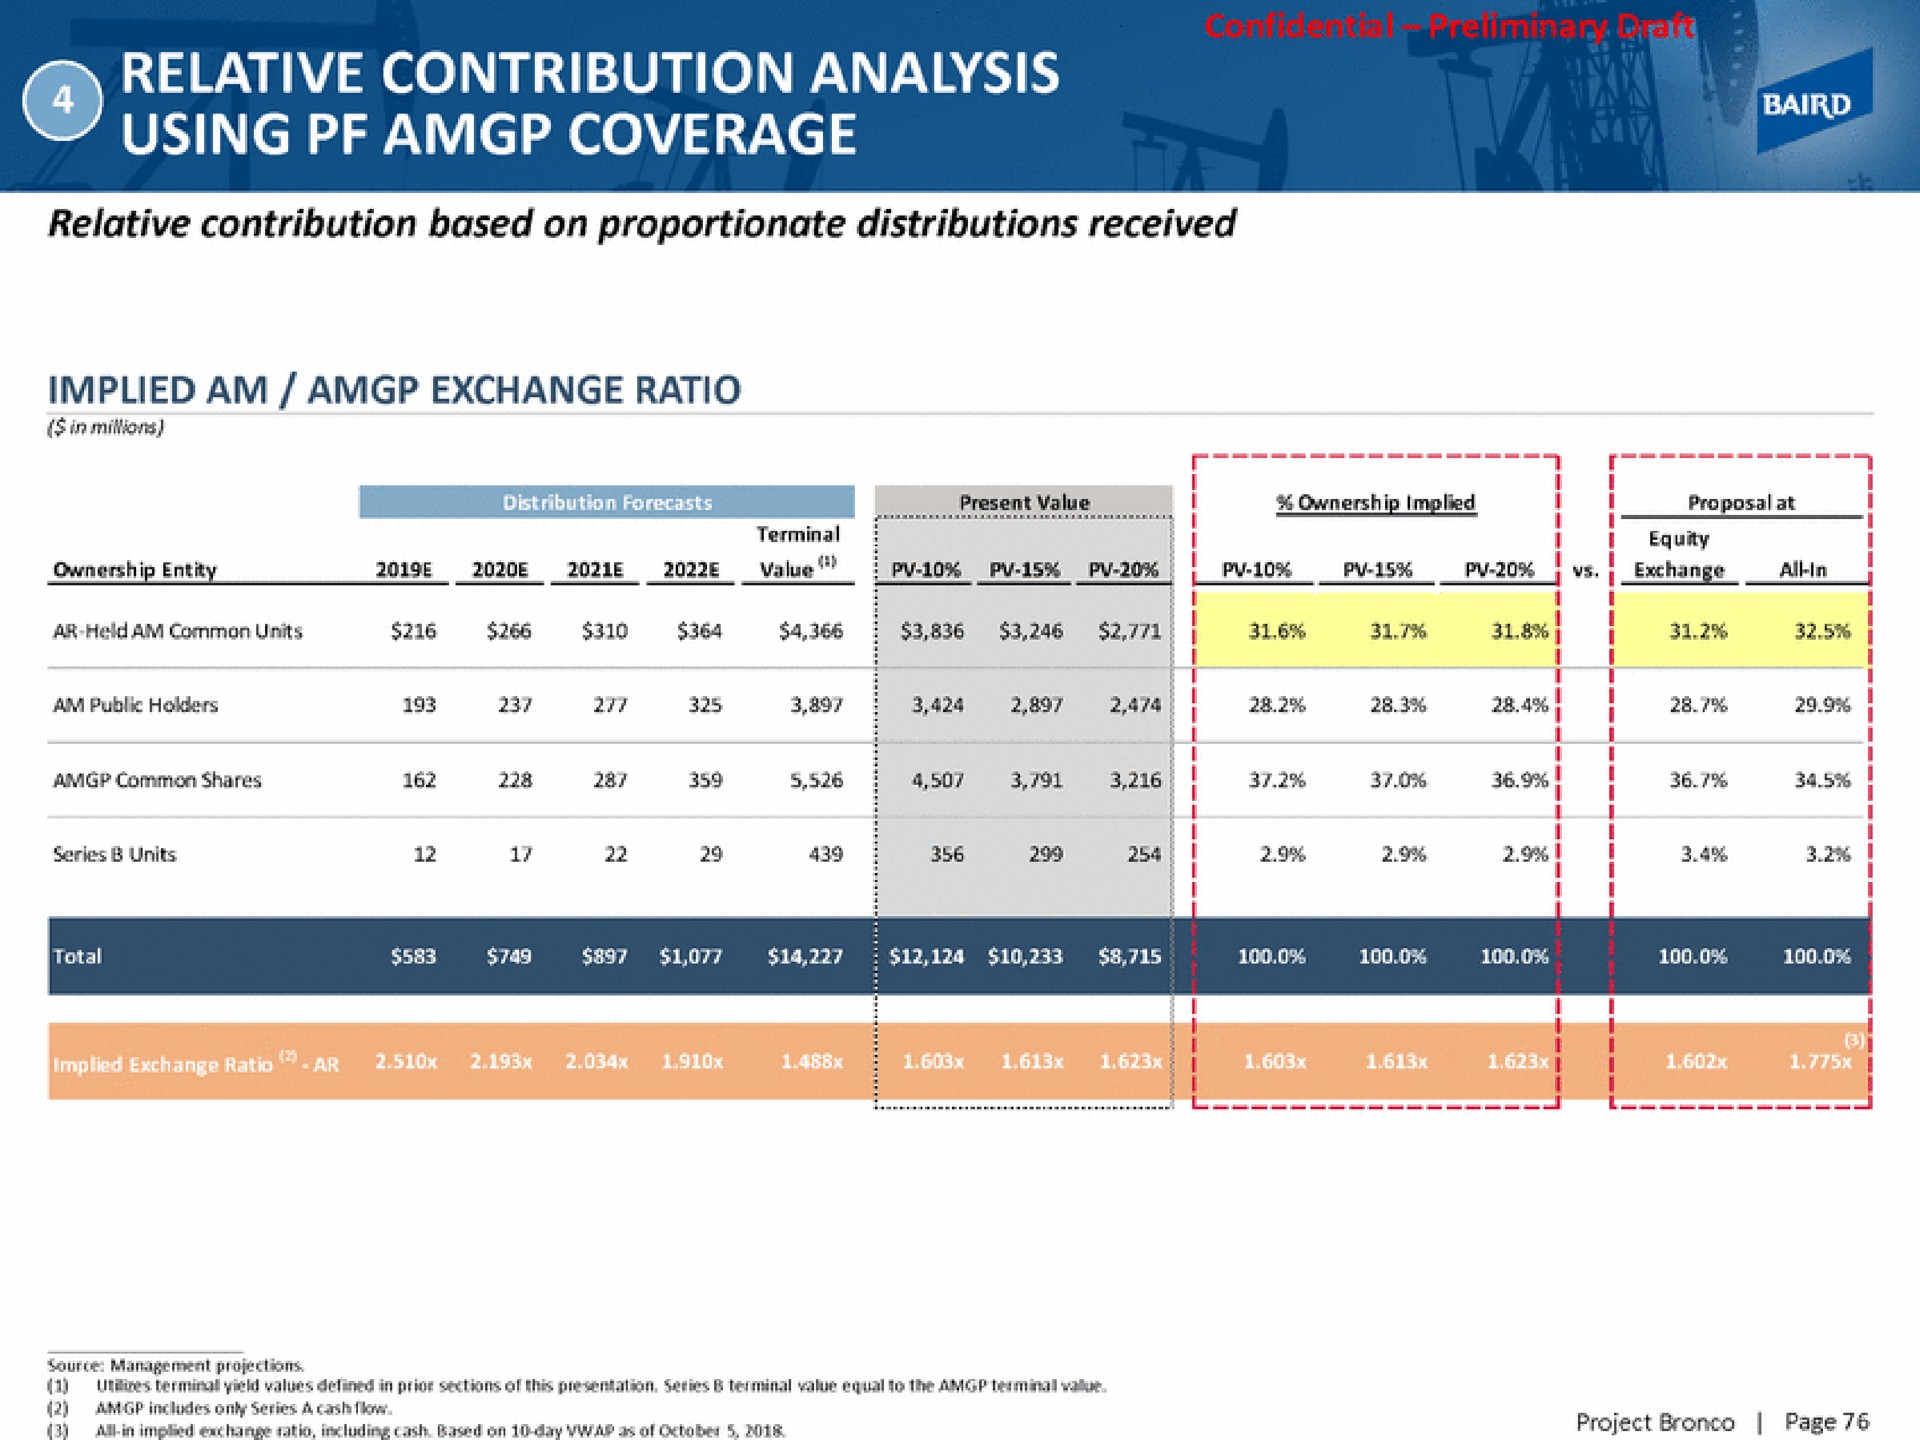 relative contribution analysis using coverage implied am exchange ratio | Baird